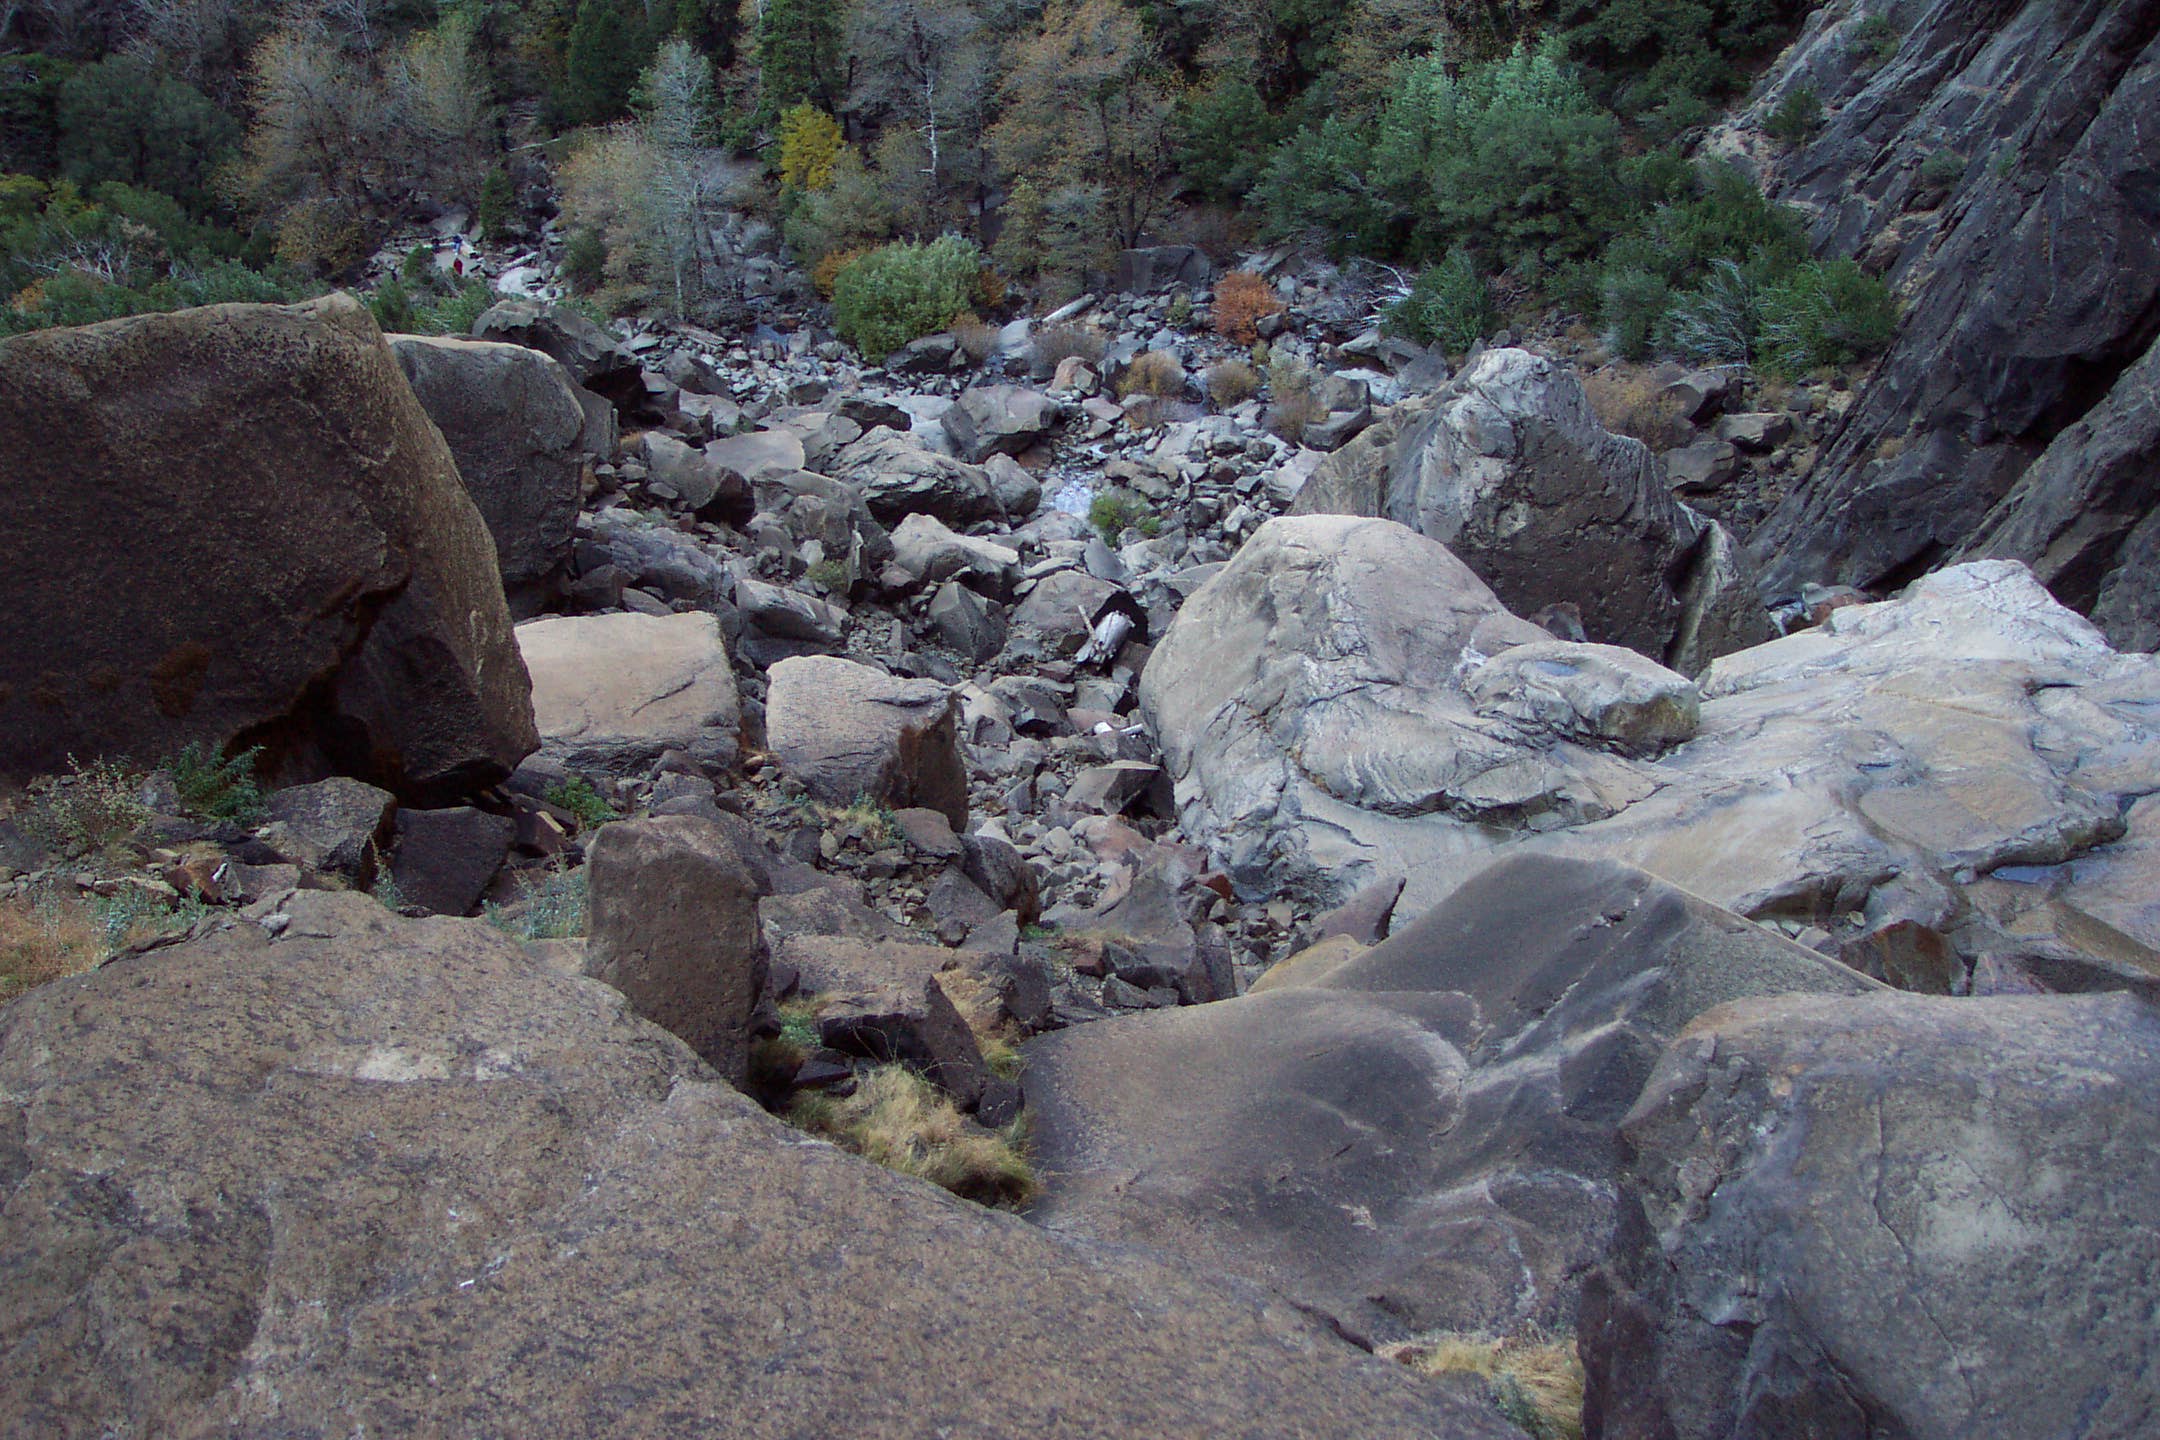 rocky terrain with rocks and boulders next to a cliff